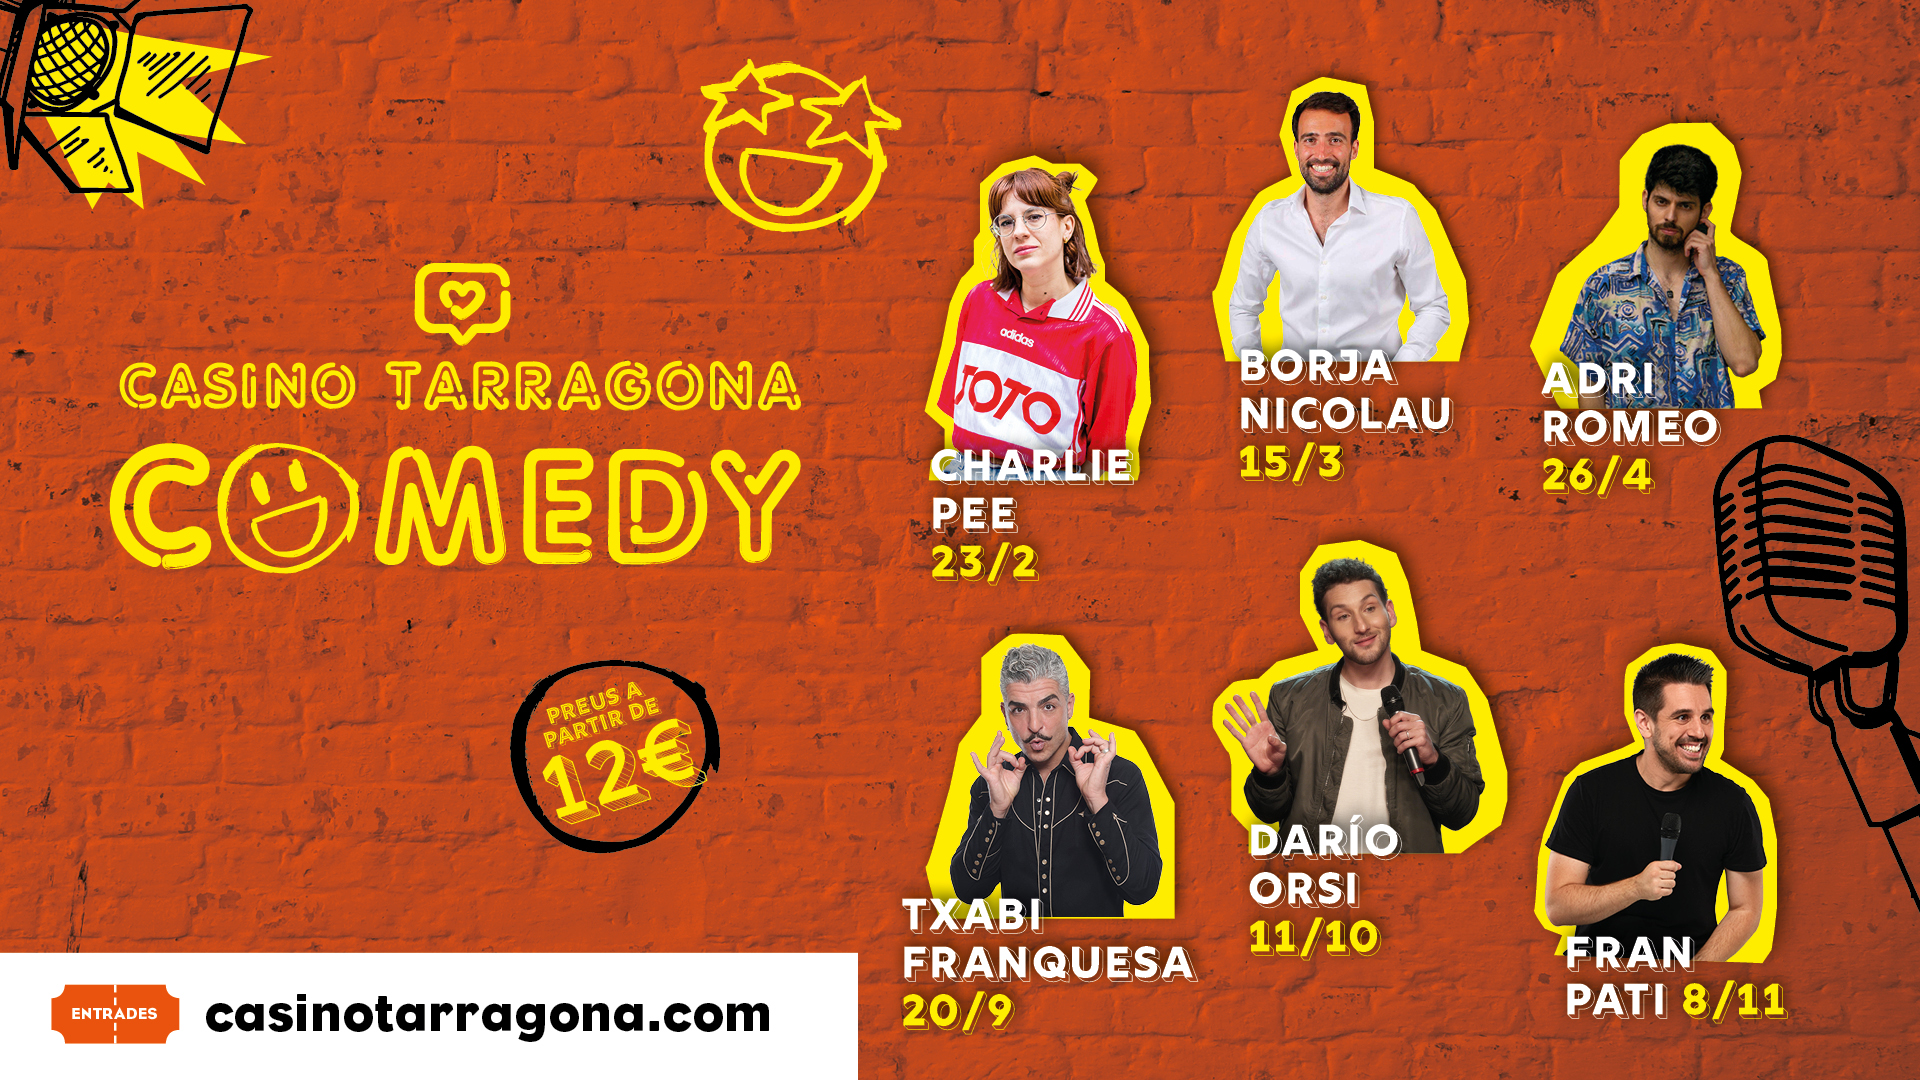 Charlie Pee, Borja Nicolau, and Adri Romeo are the protagonists of the first stage of the Casino Tarragona Comedy monologue series